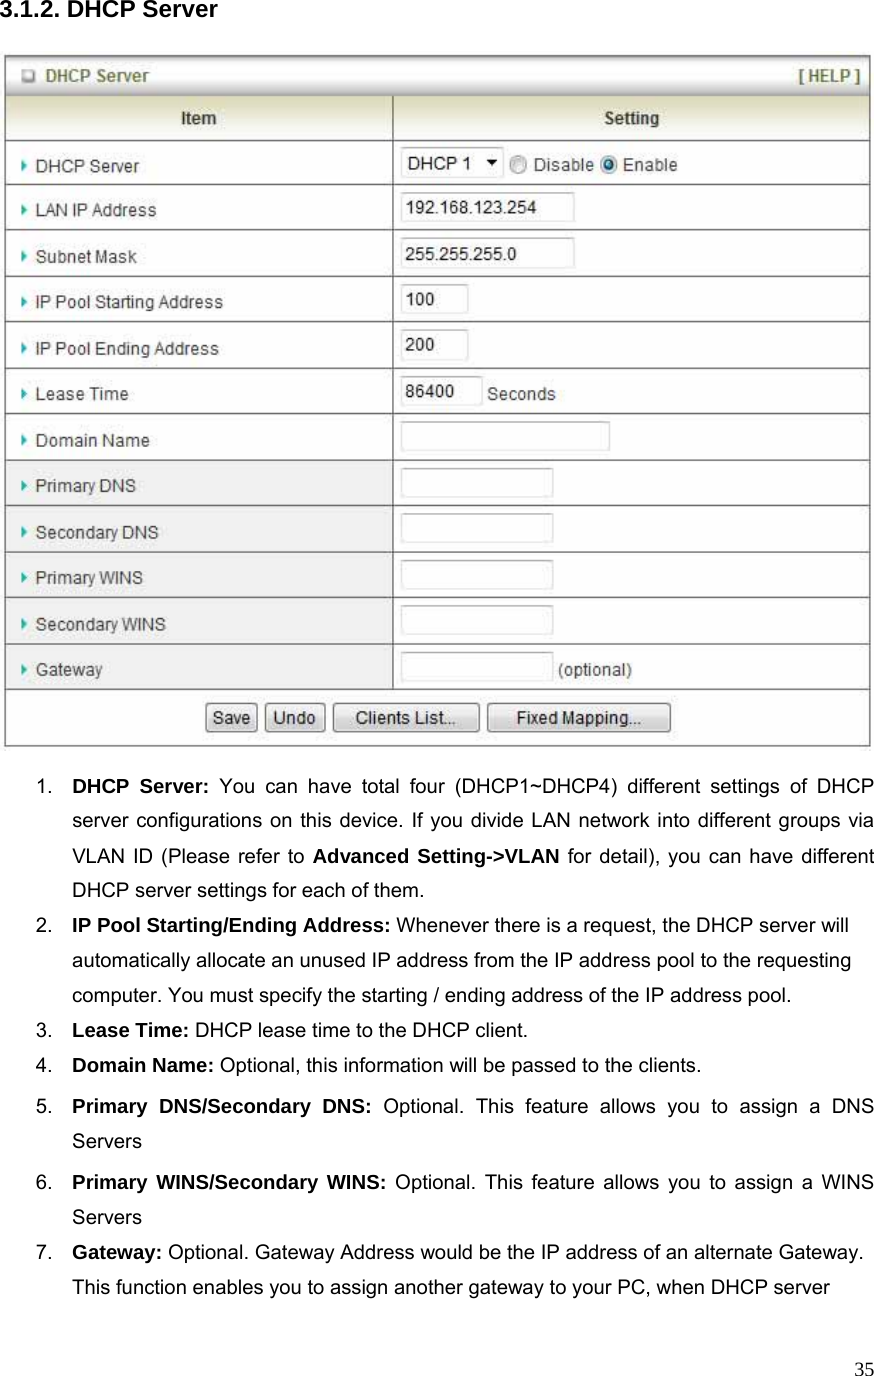  353.1.2. DHCP Server    1.  DHCP Server: You can have total four (DHCP1~DHCP4) different settings of DHCP server configurations on this device. If you divide LAN network into different groups via VLAN ID (Please refer to Advanced Setting-&gt;VLAN for detail), you can have different DHCP server settings for each of them. 2.  IP Pool Starting/Ending Address: Whenever there is a request, the DHCP server will automatically allocate an unused IP address from the IP address pool to the requesting computer. You must specify the starting / ending address of the IP address pool. 3.  Lease Time: DHCP lease time to the DHCP client. 4.  Domain Name: Optional, this information will be passed to the clients. 5.  Primary DNS/Secondary DNS: Optional. This feature allows you to assign a DNS Servers 6.  Primary WINS/Secondary WINS: Optional. This feature allows you to assign a WINS Servers 7.  Gateway: Optional. Gateway Address would be the IP address of an alternate Gateway. This function enables you to assign another gateway to your PC, when DHCP server 